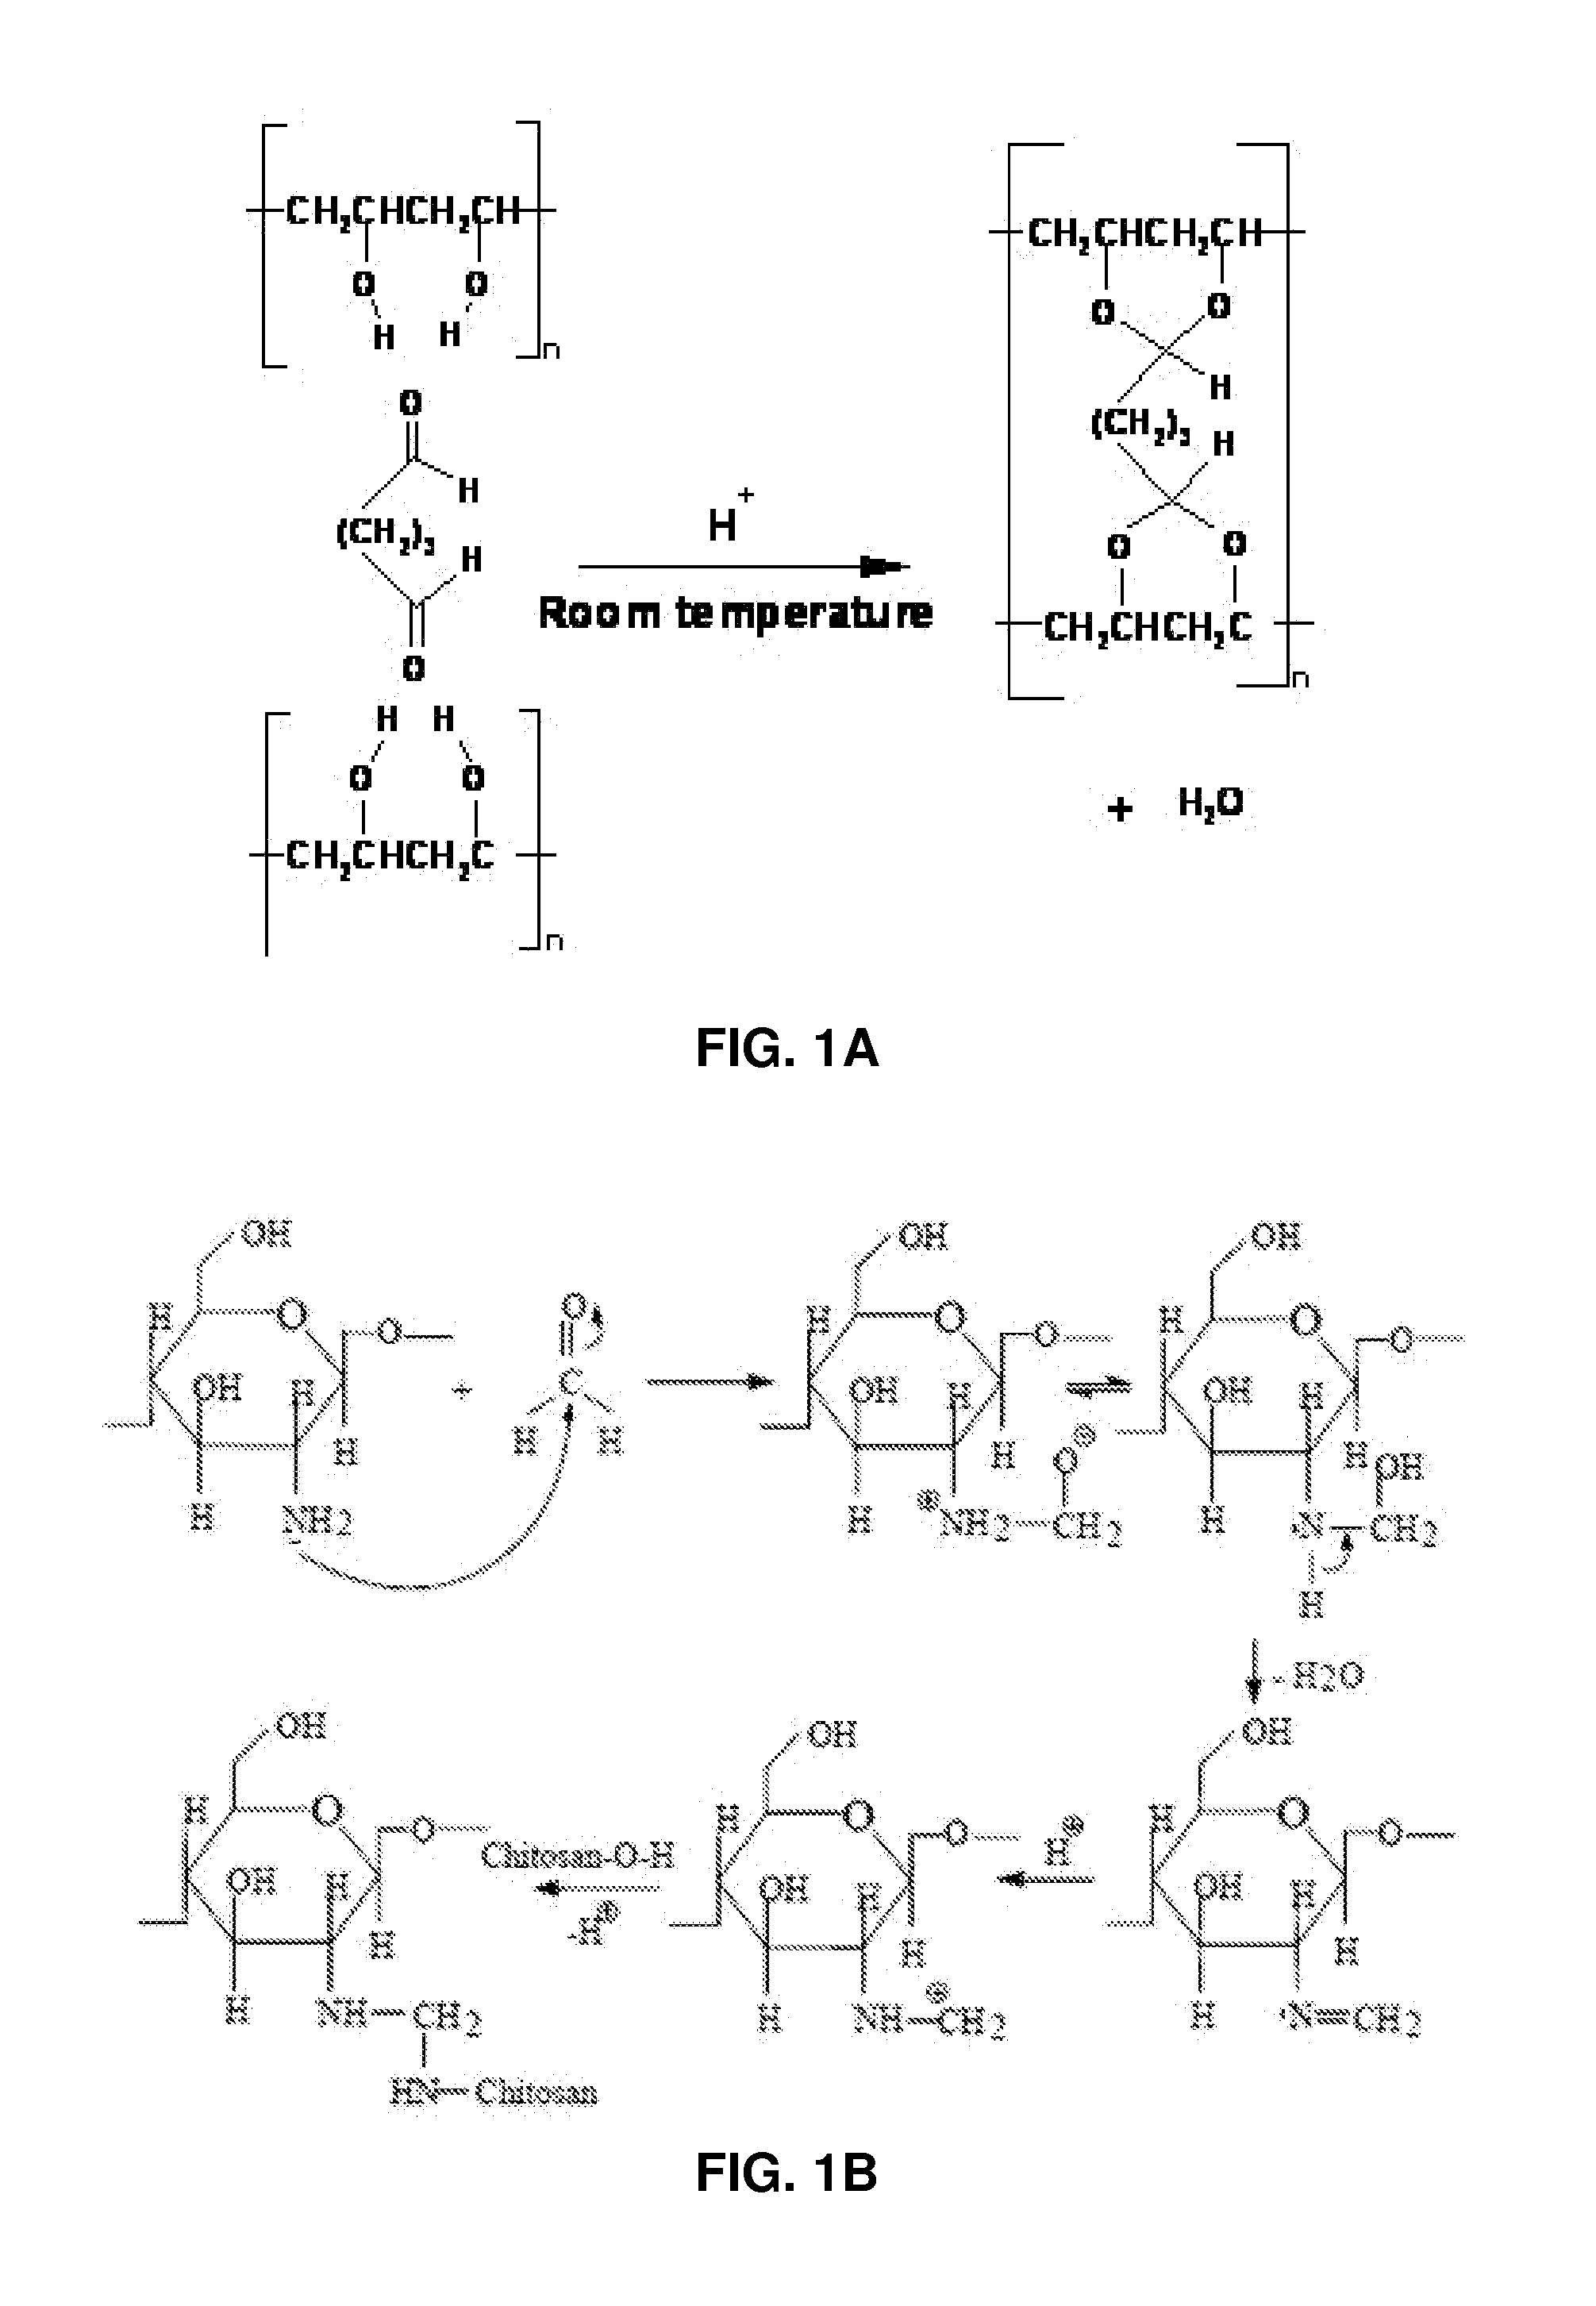 CHEMICALLY LINKED HYDROGEL MATERIALS AND USES THEREOF IN ELECTRODES and/or ELECTROLYTES IN ELECTROCHEMICAL ENERGY DEVICES